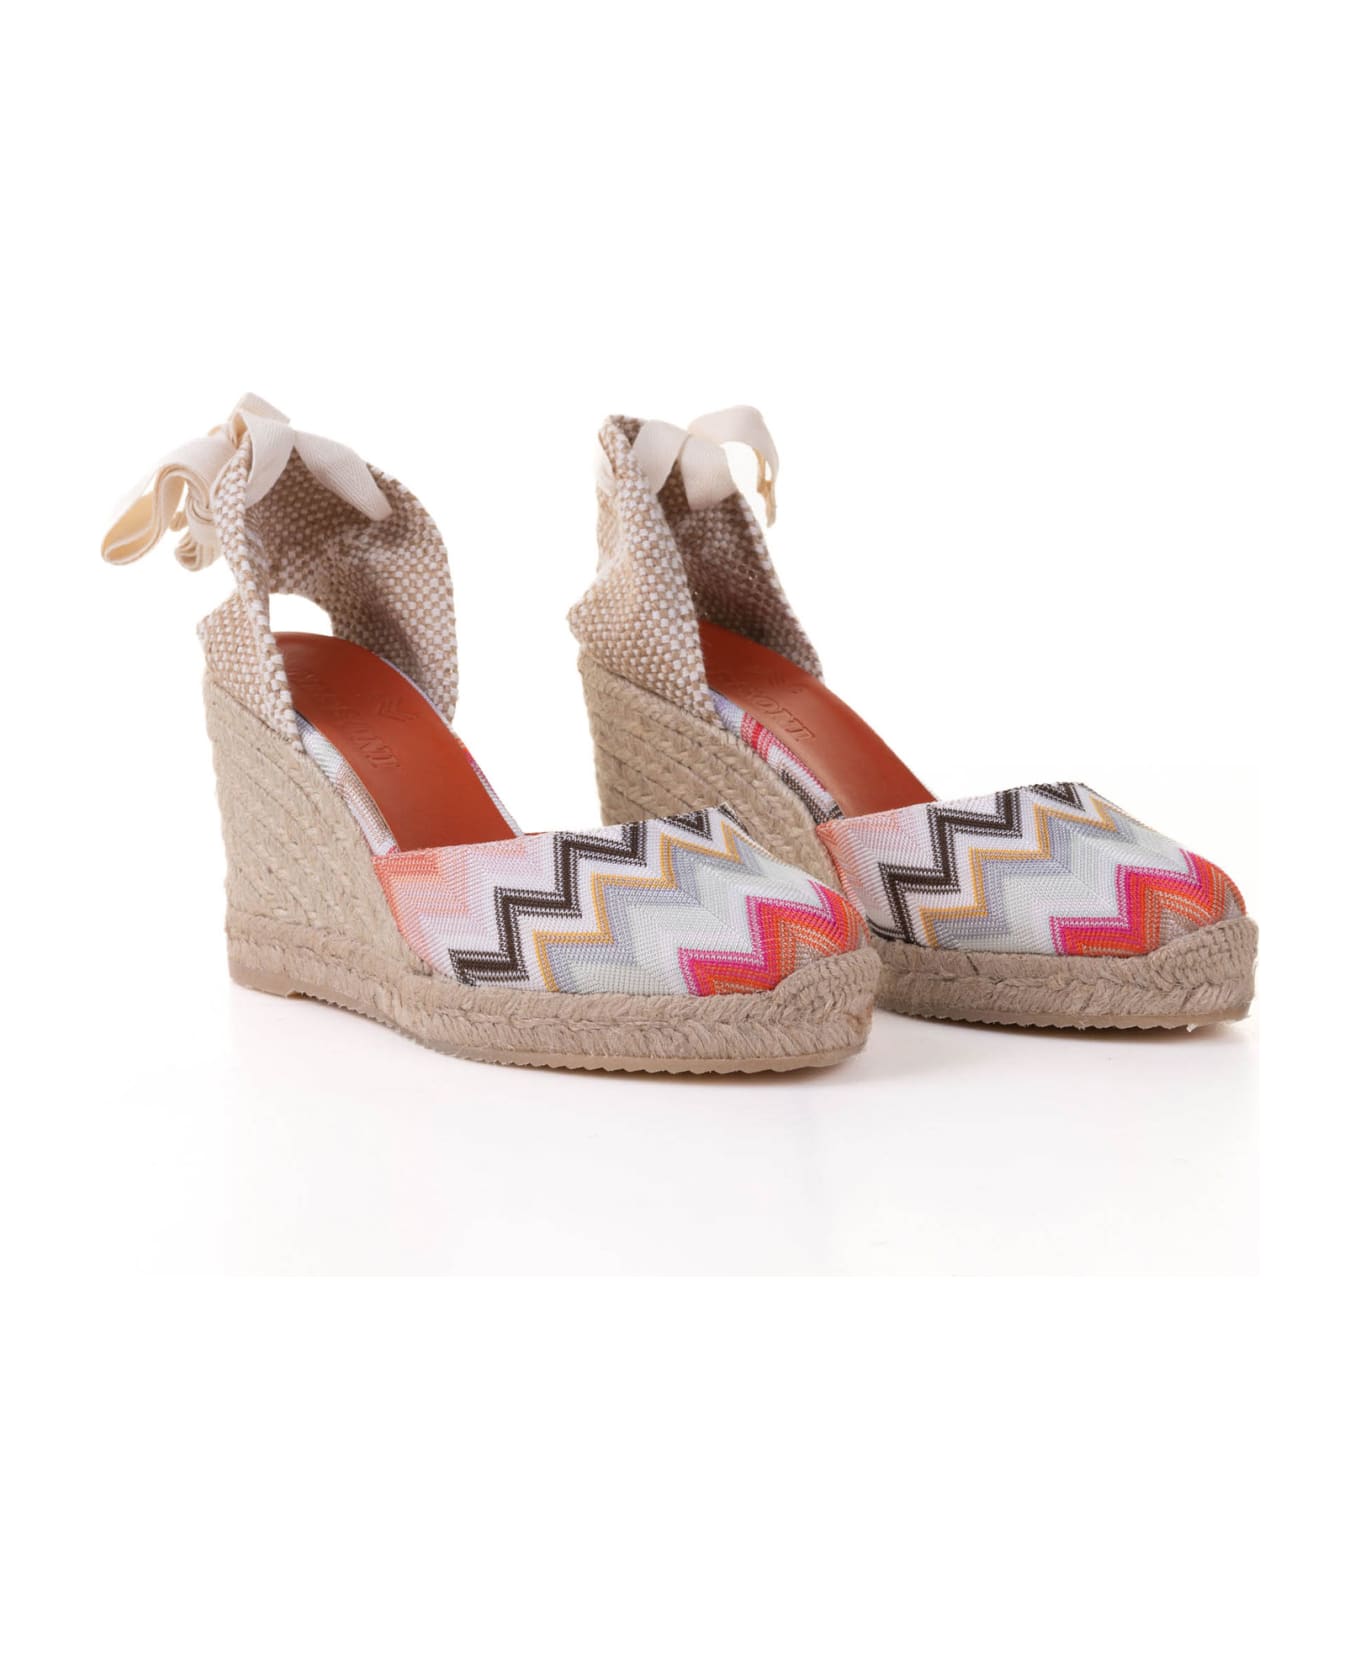 Missoni Espadrilles In Chevron Fabric With Wedge And Ankle Laces - PINK